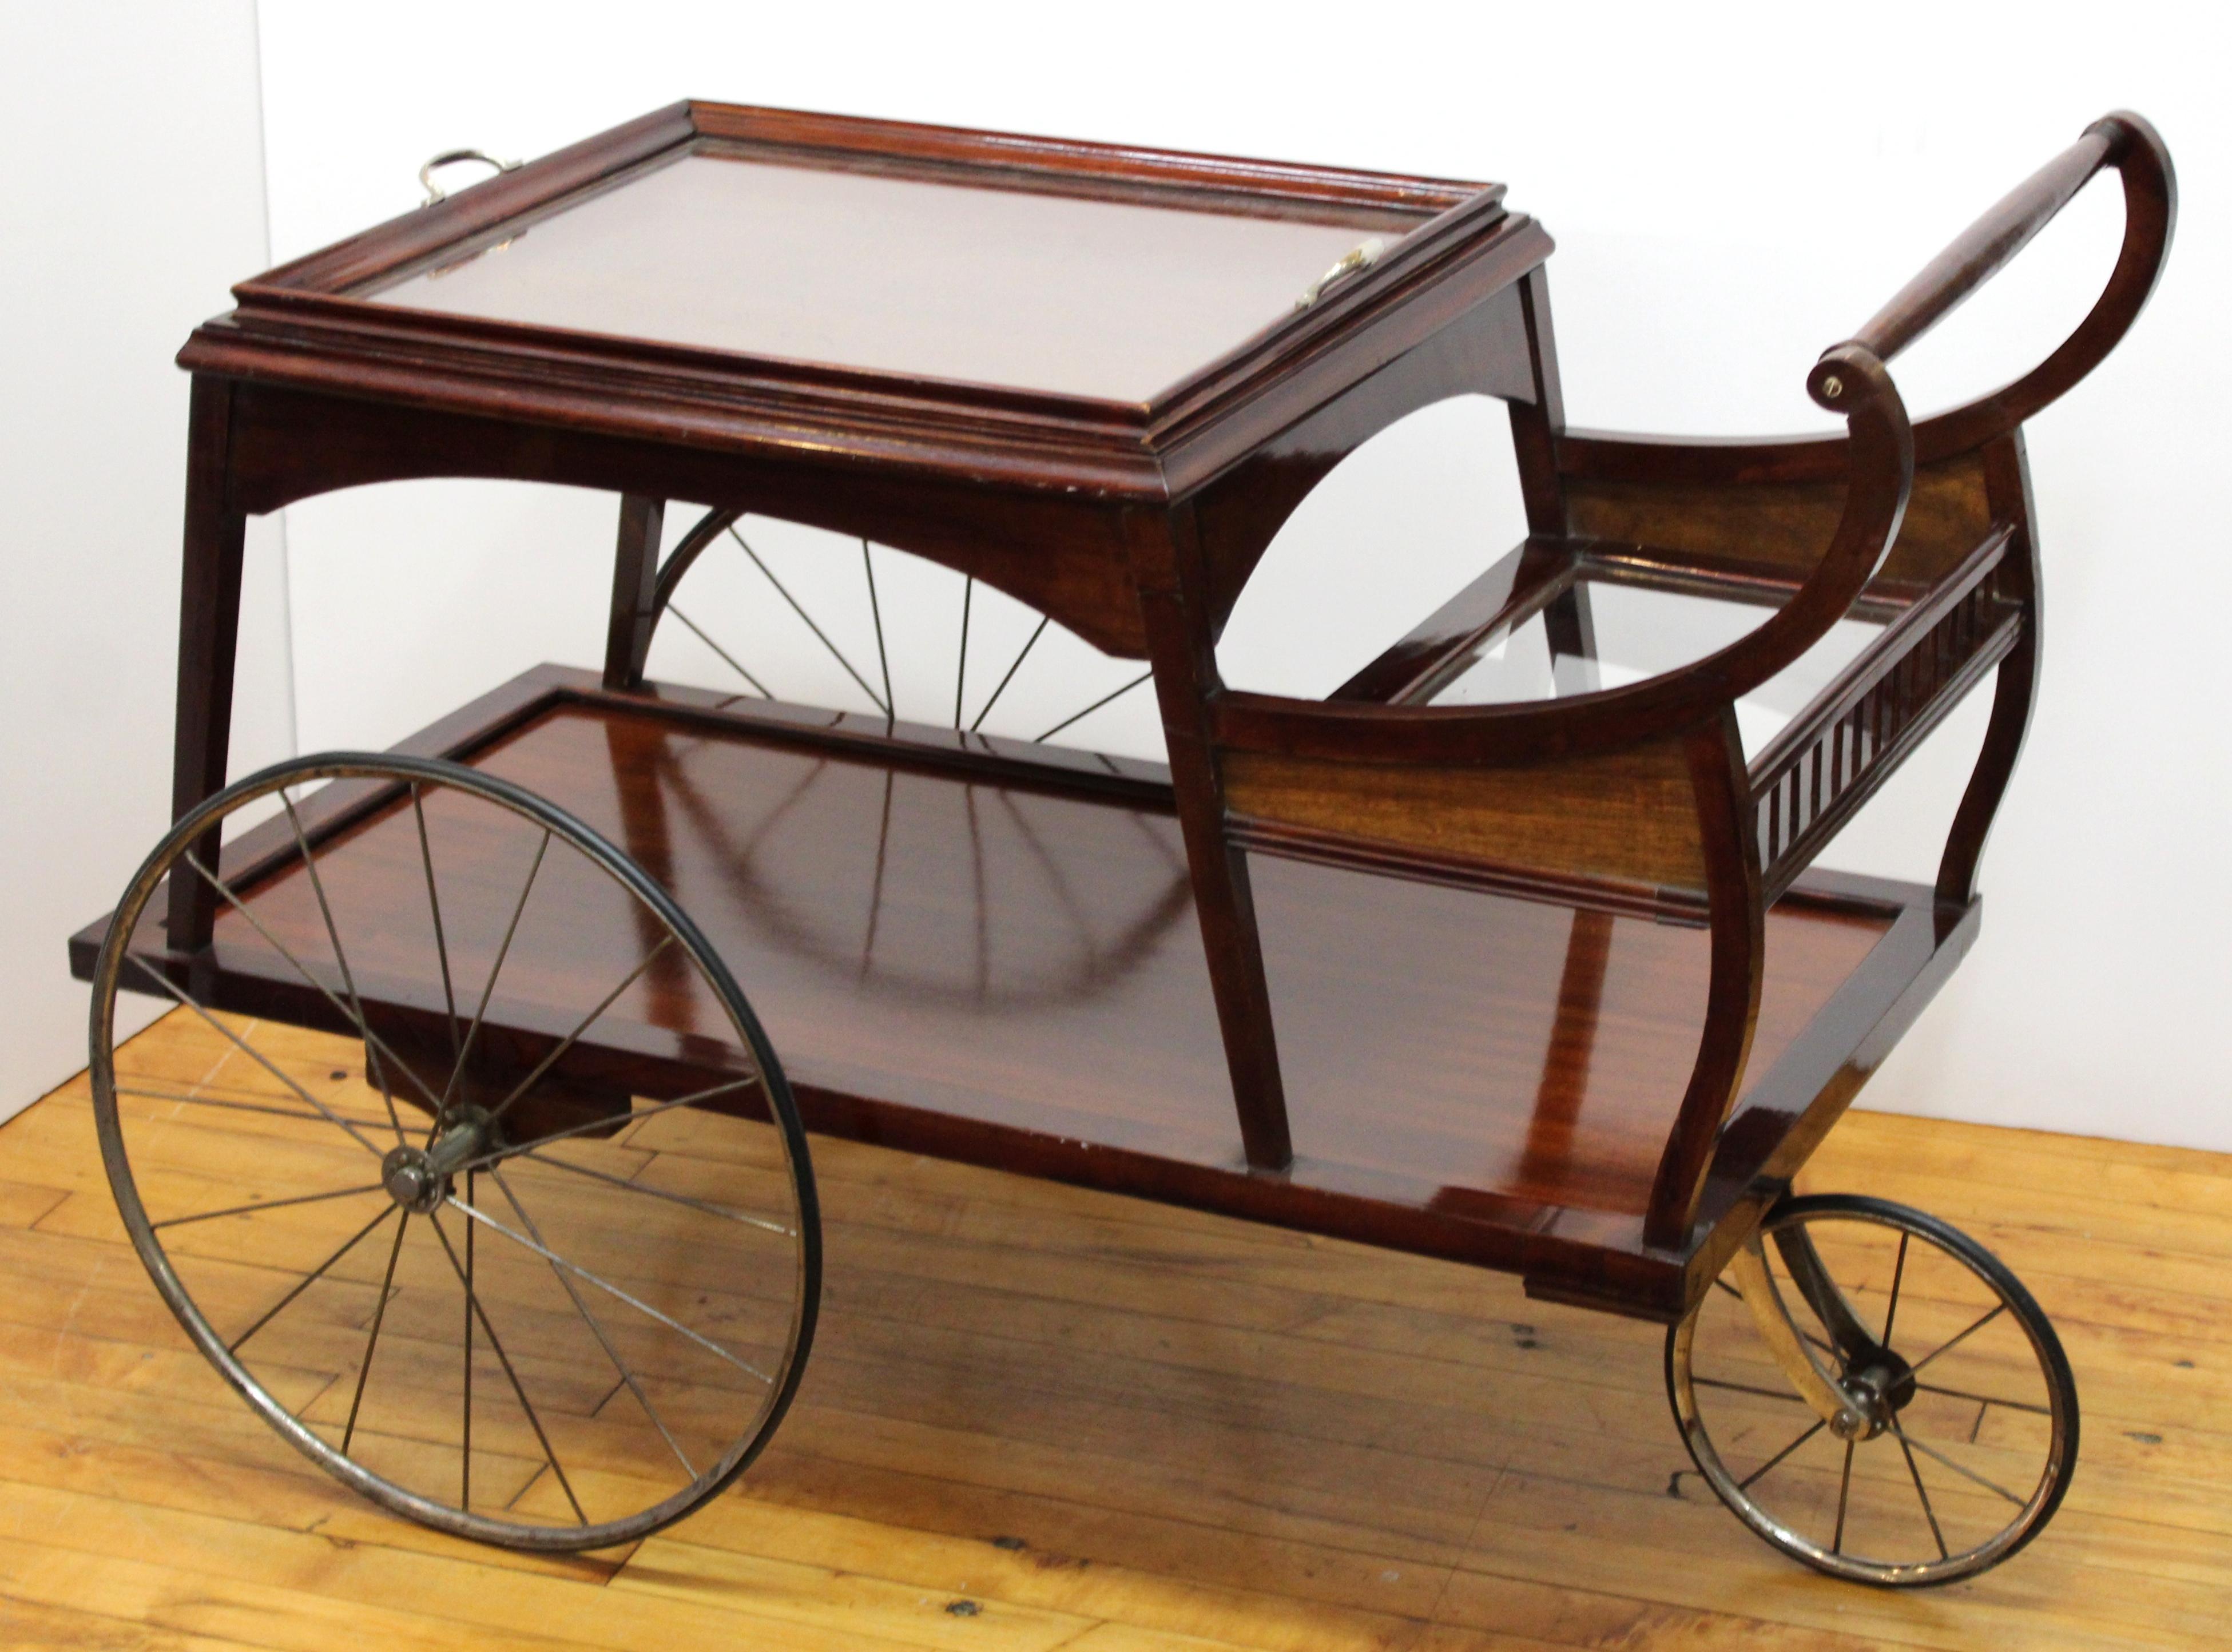 Viennese Art Nouveau period serving cart in wood, metal and glass, with a removable glass serving tray inserted on the top level and three spoke wheels. The piece was made in circa 1902 in Austria. In great condition with some age-appropriate wear